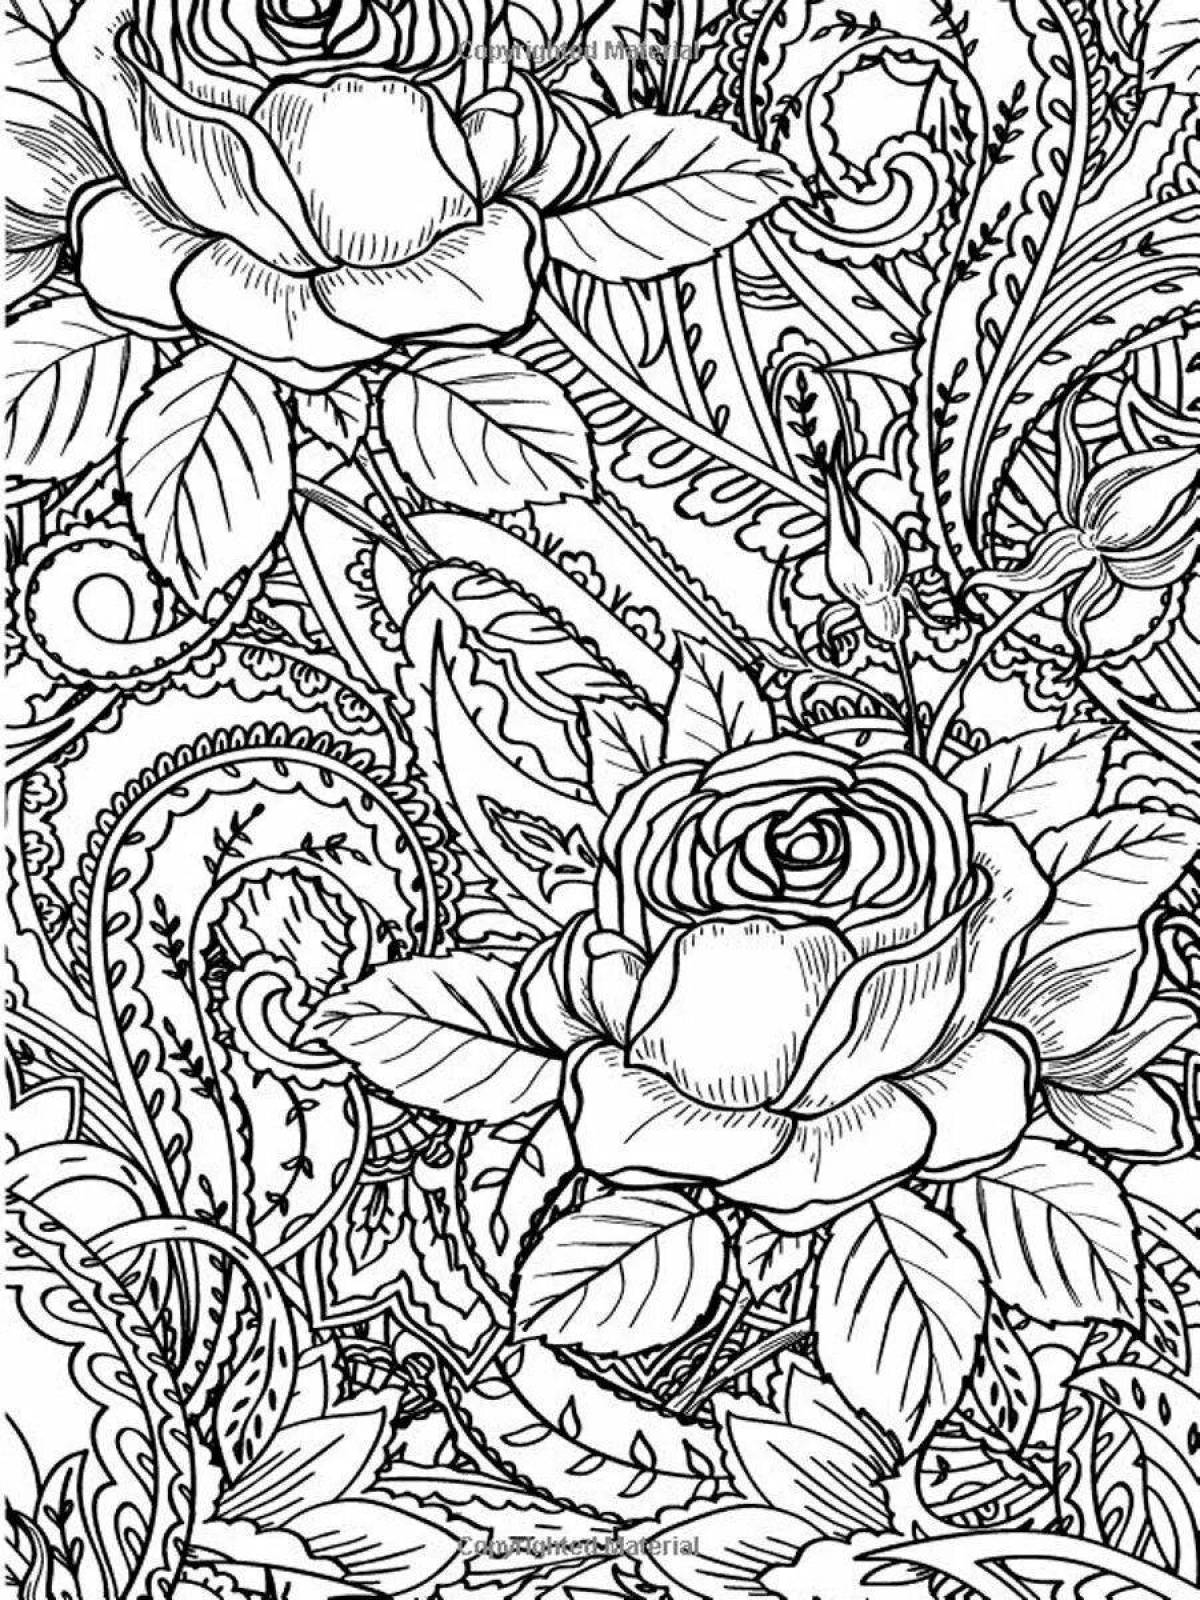 Fascinating anti-stress coloring book for adults 18